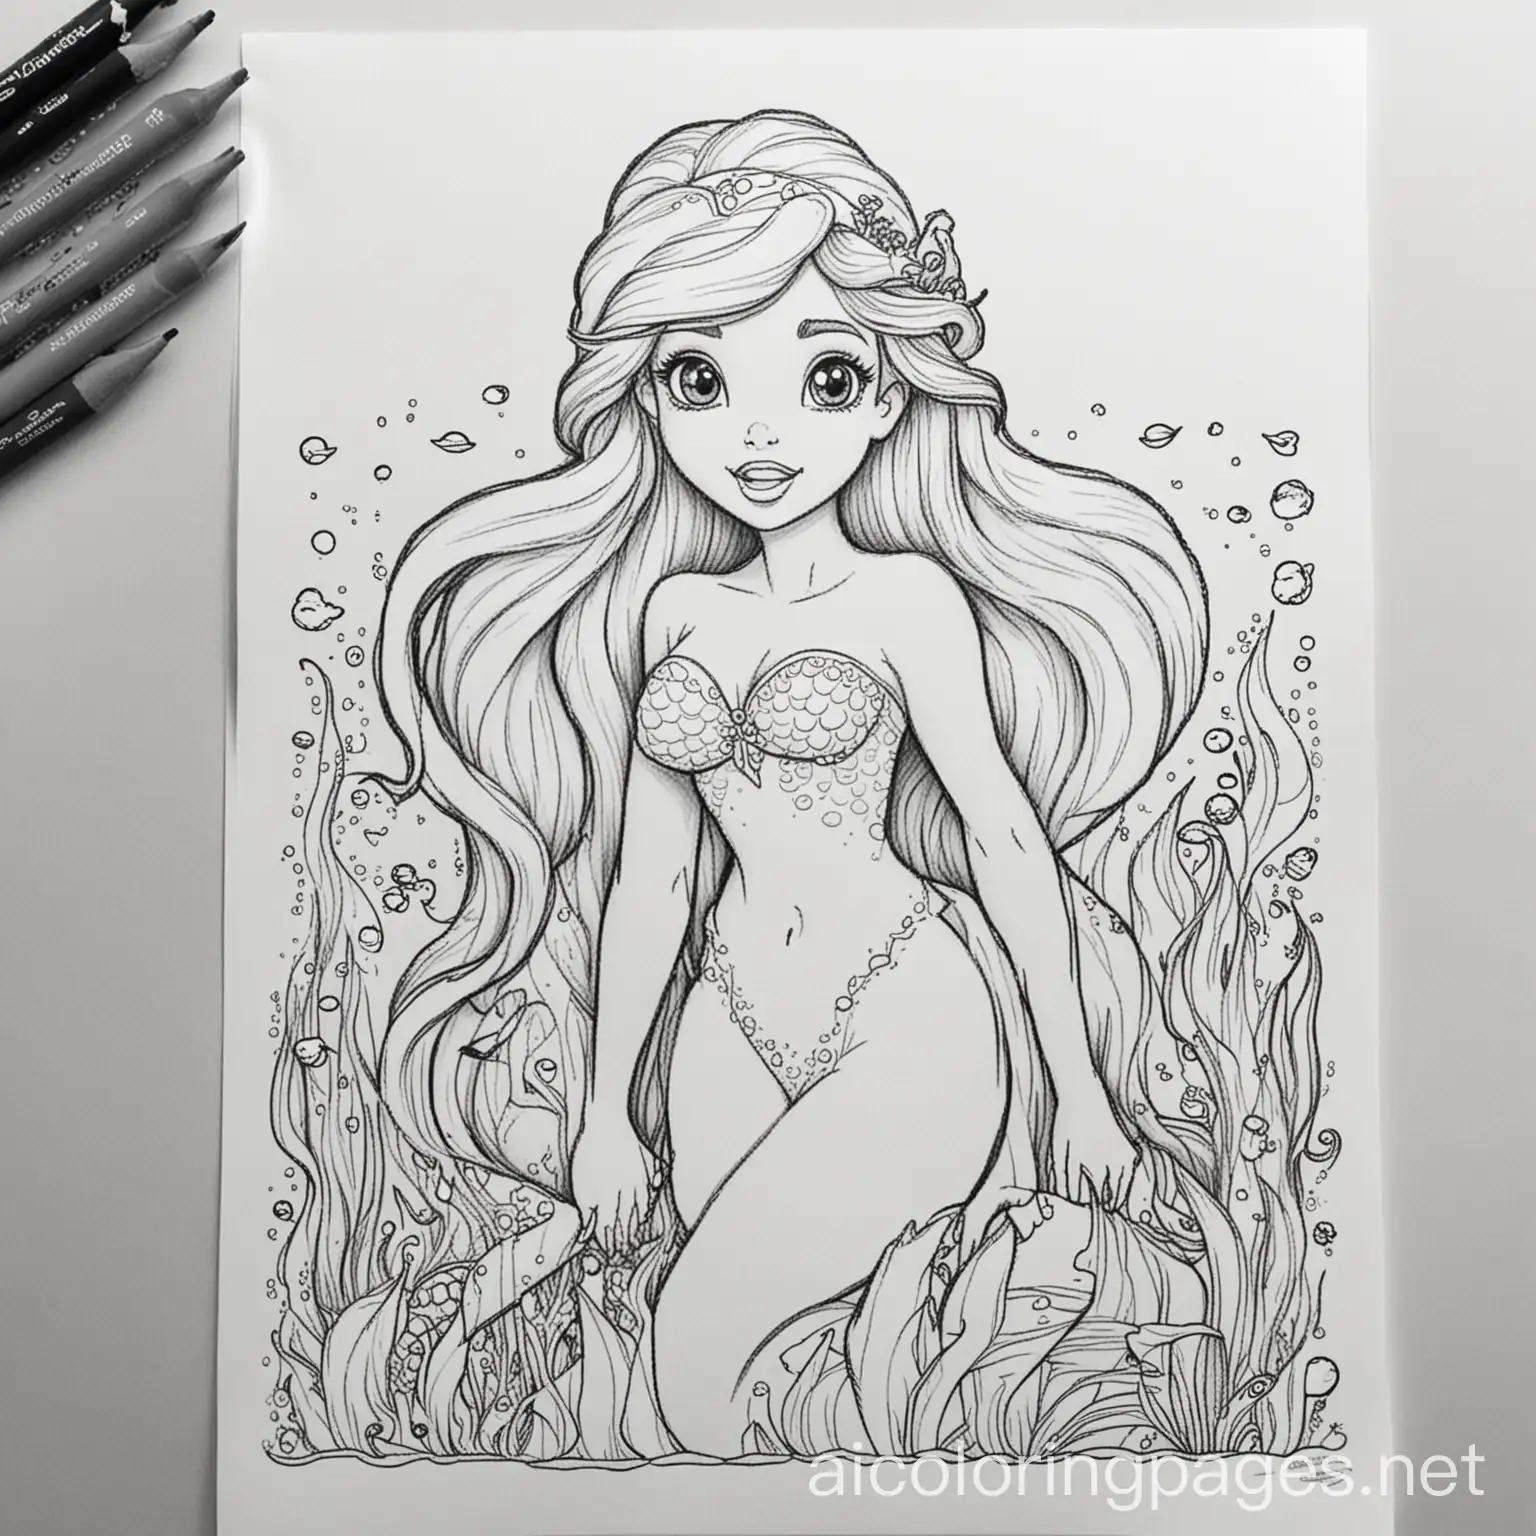 The little mermaid, Coloring Page, black and white, line art, white background, Simplicity, Ample White Space. The background of the coloring page is plain white to make it easy for young children to color within the lines. The outlines of all the subjects are easy to distinguish, making it simple for kids to color without too much difficulty